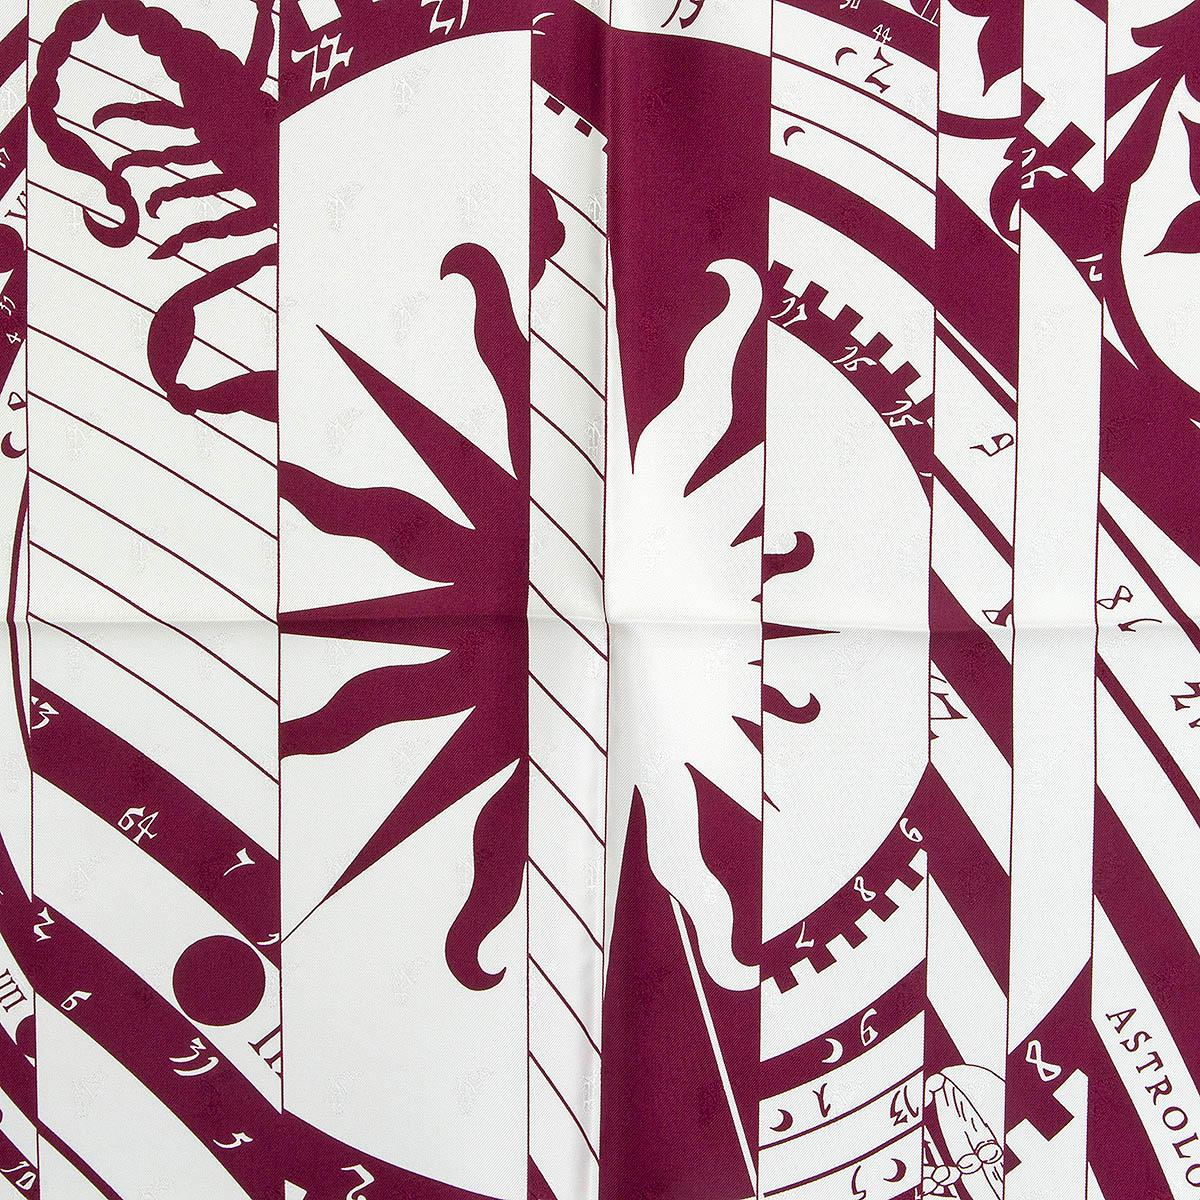 100% authentic Hermès Astrologie Nouvelle Tattoo 90 scarf by Francoise Faconnet reinterpreted by Cyrille Diaktine in burgundy and off-white silk jacquard (100%) with a contrasting pink hem. Has been worn and is in excellent condition. 
Issued in